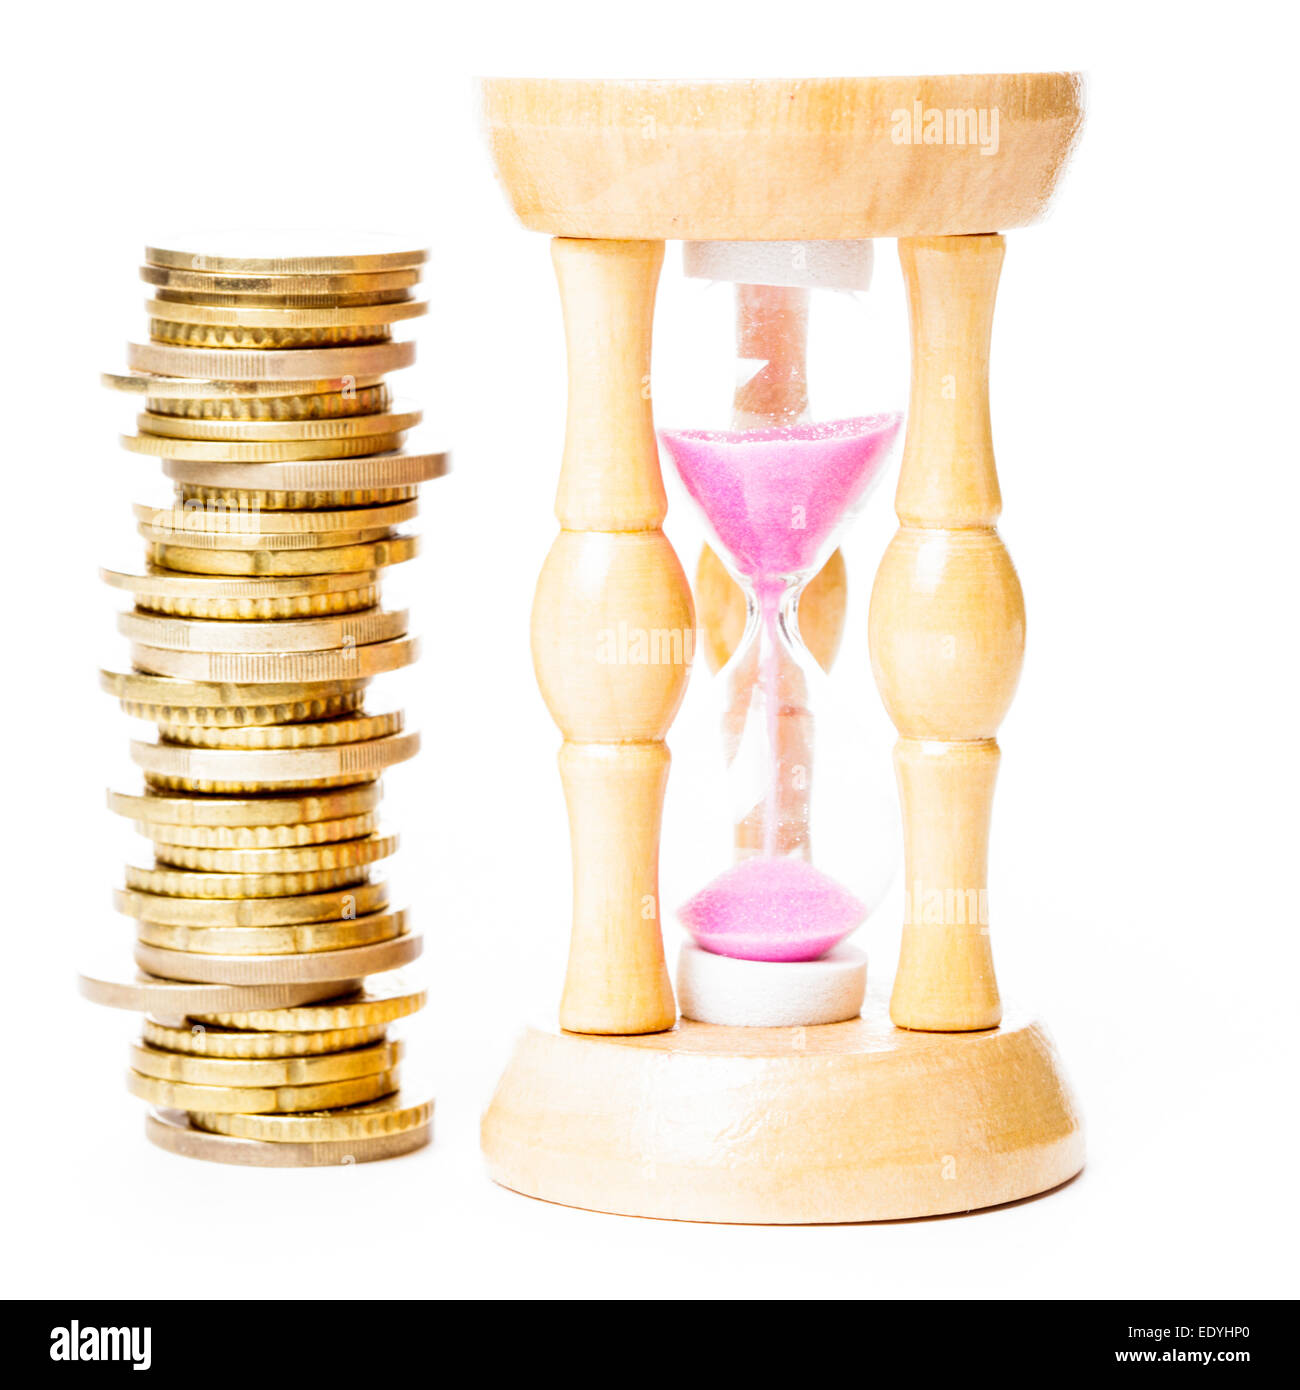 Time is money Stock Photo